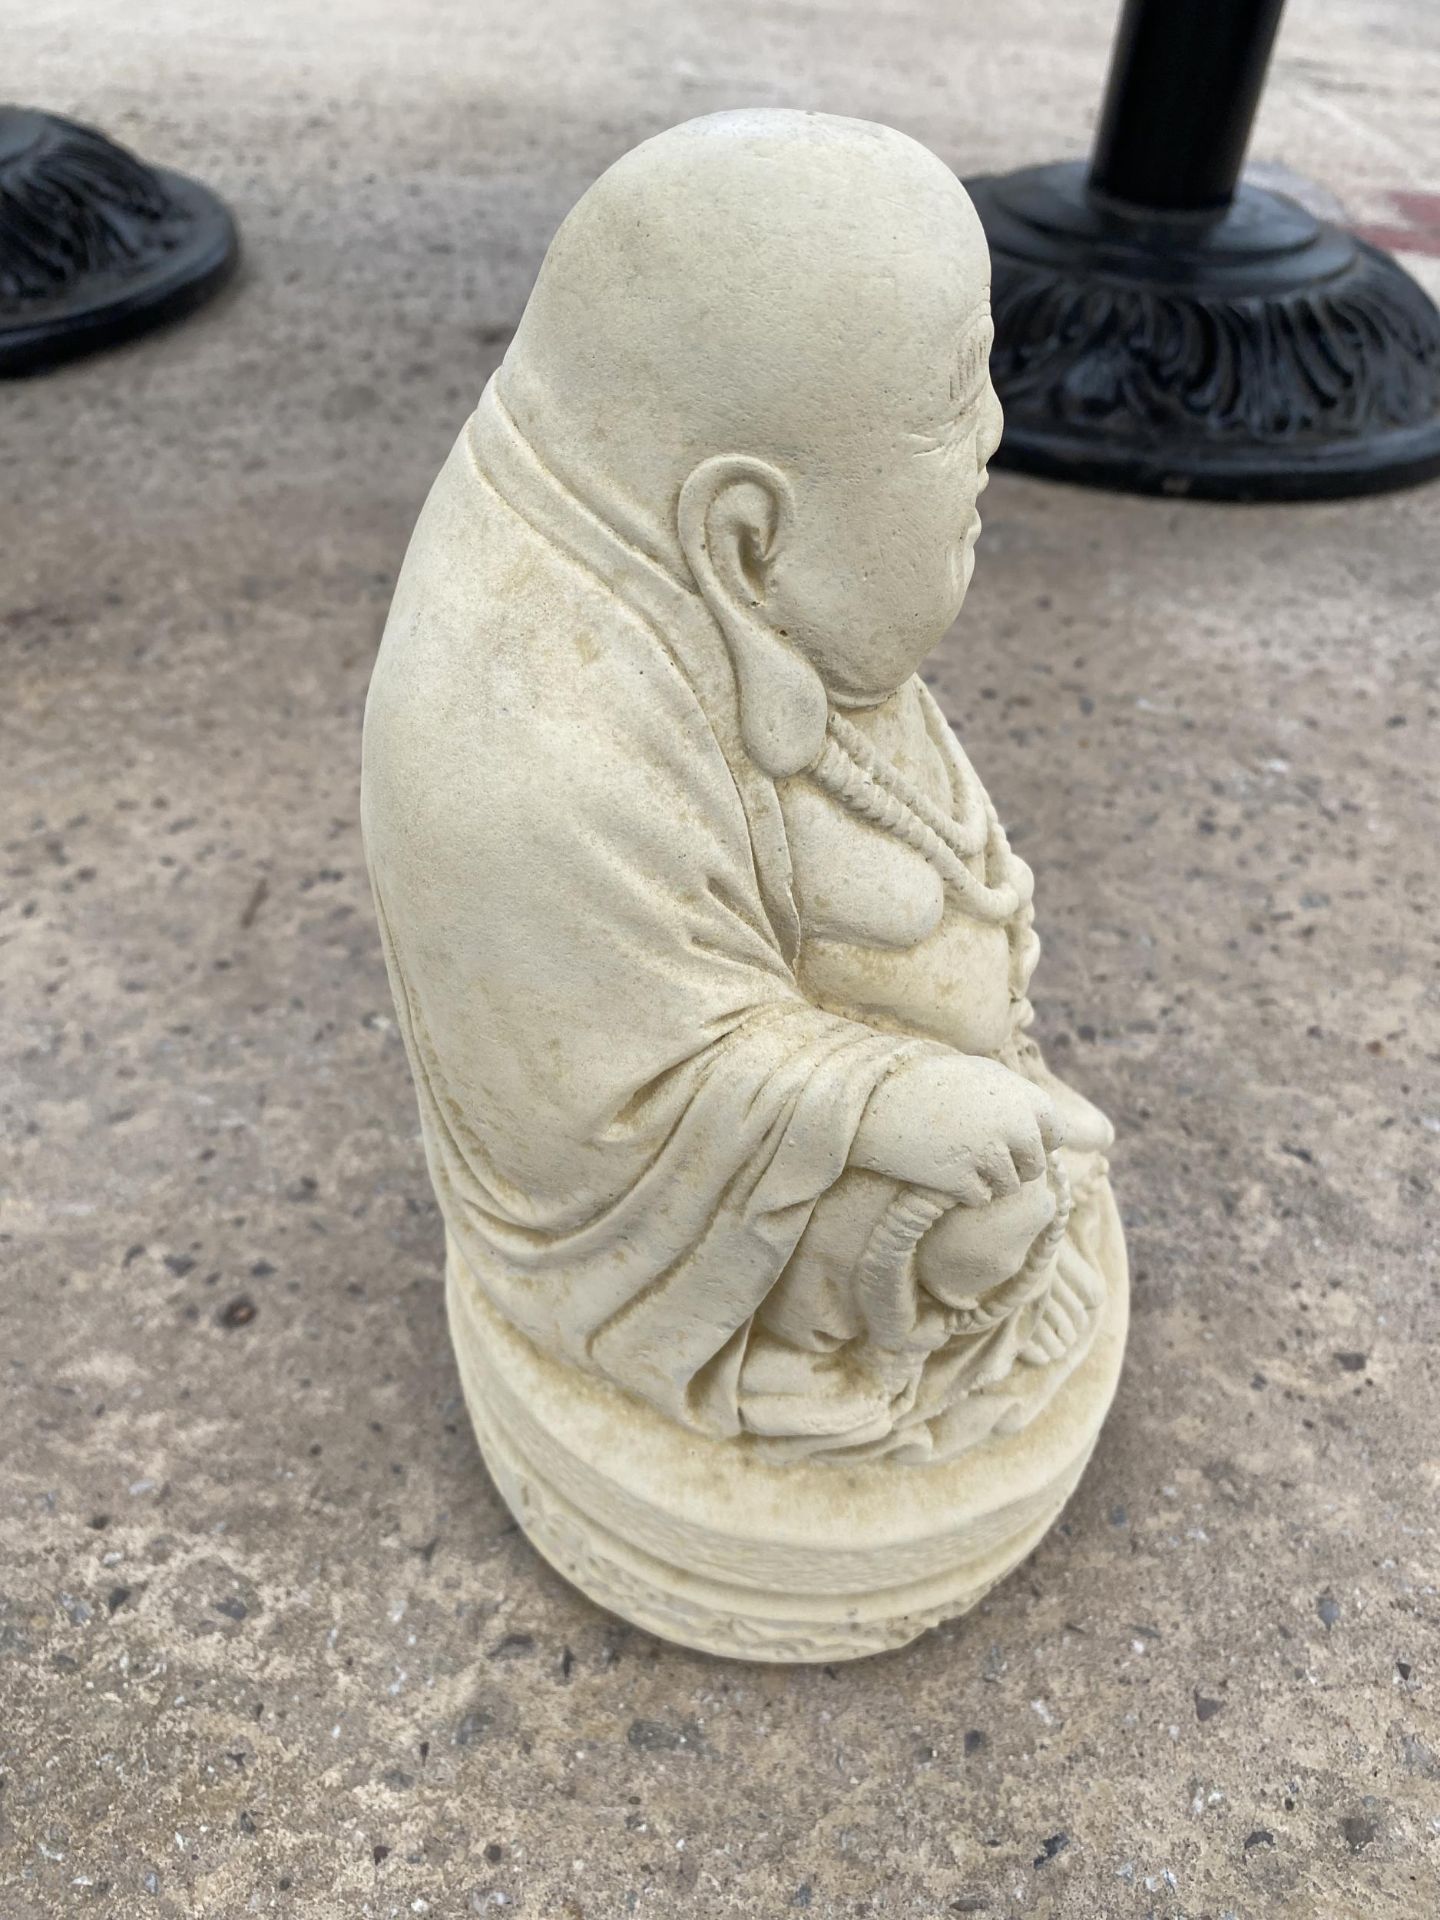 AN AS NEW EX DISPLAY CONCRETE 'SMALL BUDDHA' STATUE *PLEASE NOTE VAT TO BE PAID ON THIS ITEM* - Bild 3 aus 4